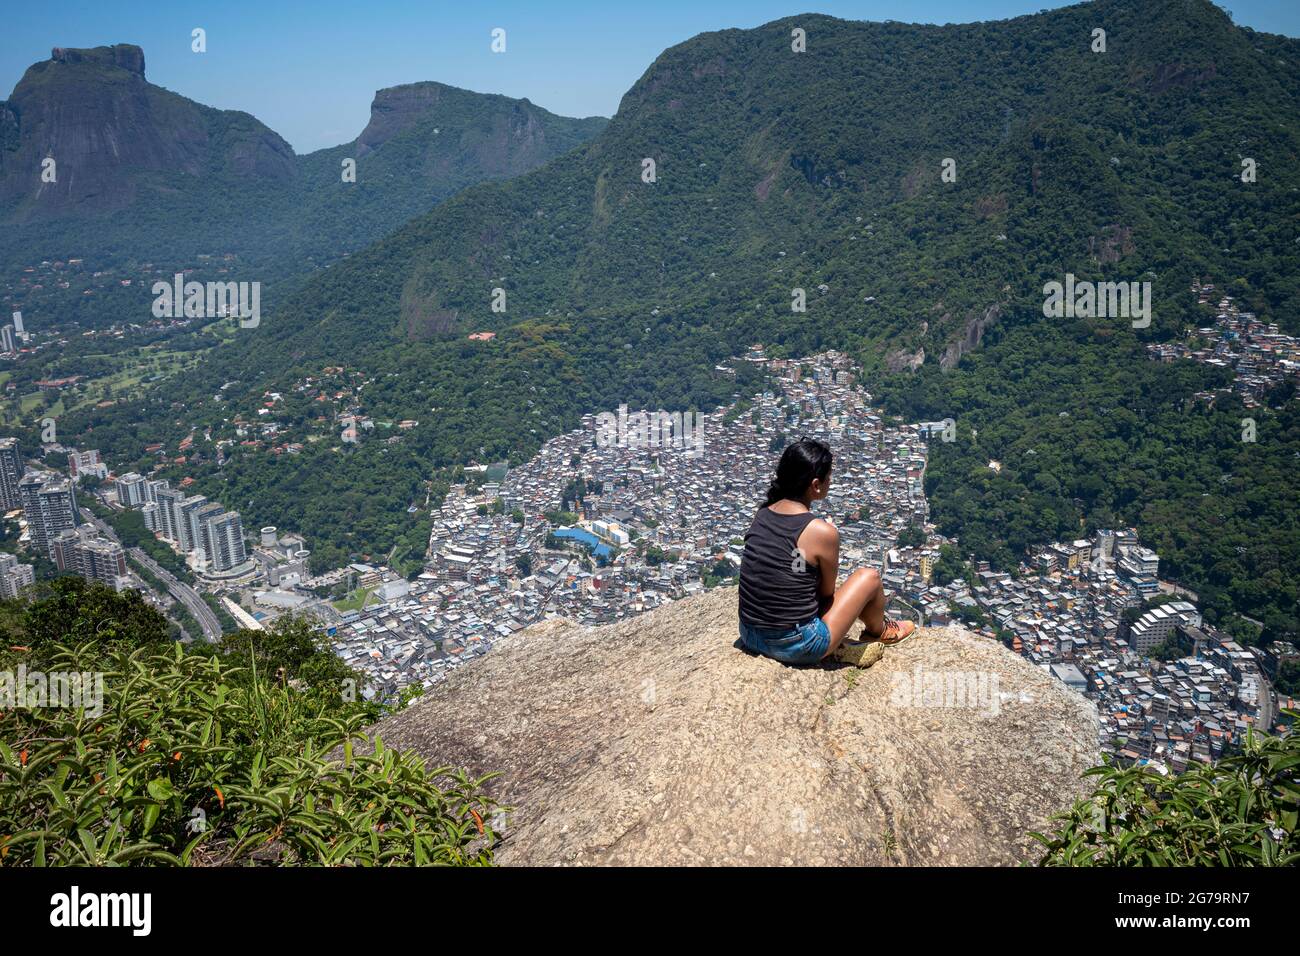 Elevated view from the cliff edge of two brothers hill (dos irmaos) with leica m10 over the Rocinha Favela - dense slum full of brick houses - in Rio de Janeiro, Brazil, from the top of Dois Irmaos Mountain. Stock Photo